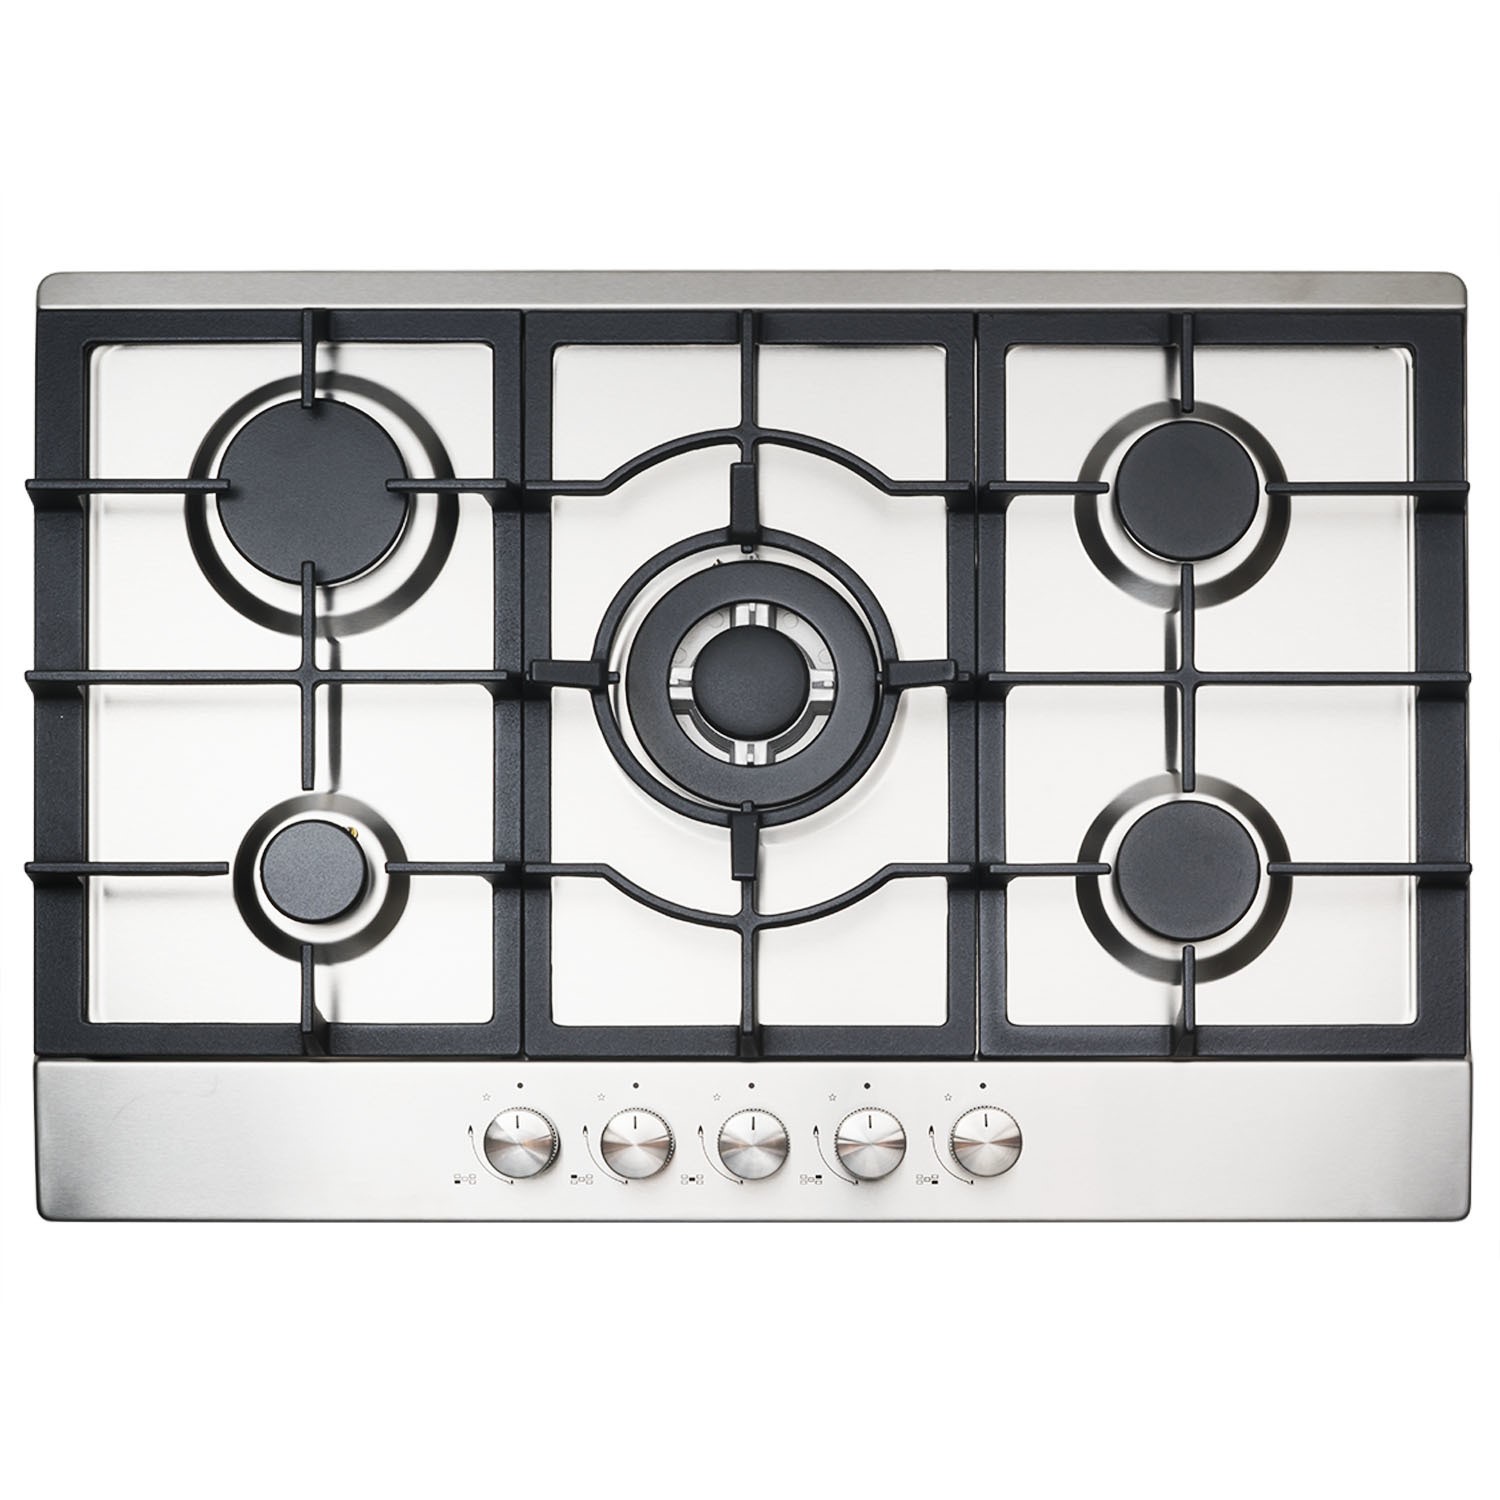 75cm Stainless Steel 5 Burner Gas Hob with Cast Iron Pan Supports